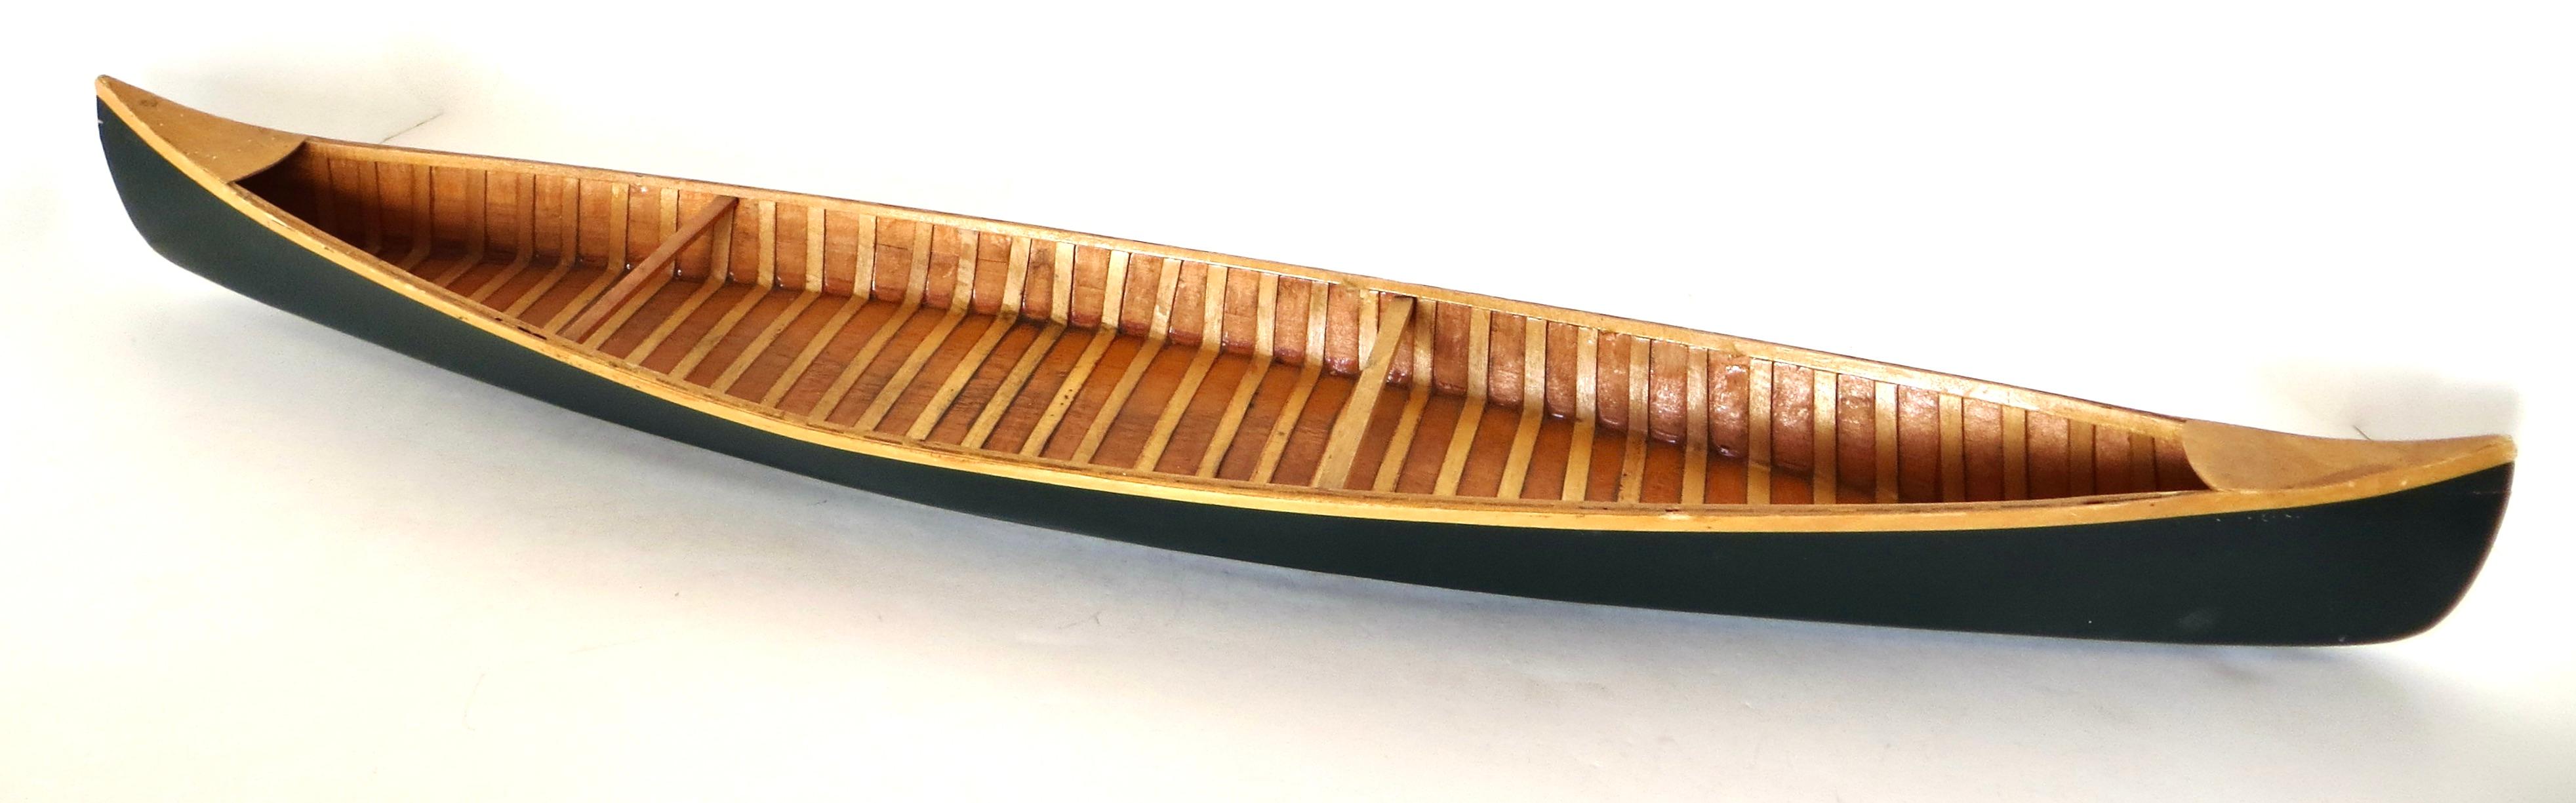 While this model canoe might have been used as a salesman sample, whereby merchants, carried it from town to town to encourage sales, it was more than likely used as a demonstration model or a display piece in showrooms by the retailer with limited